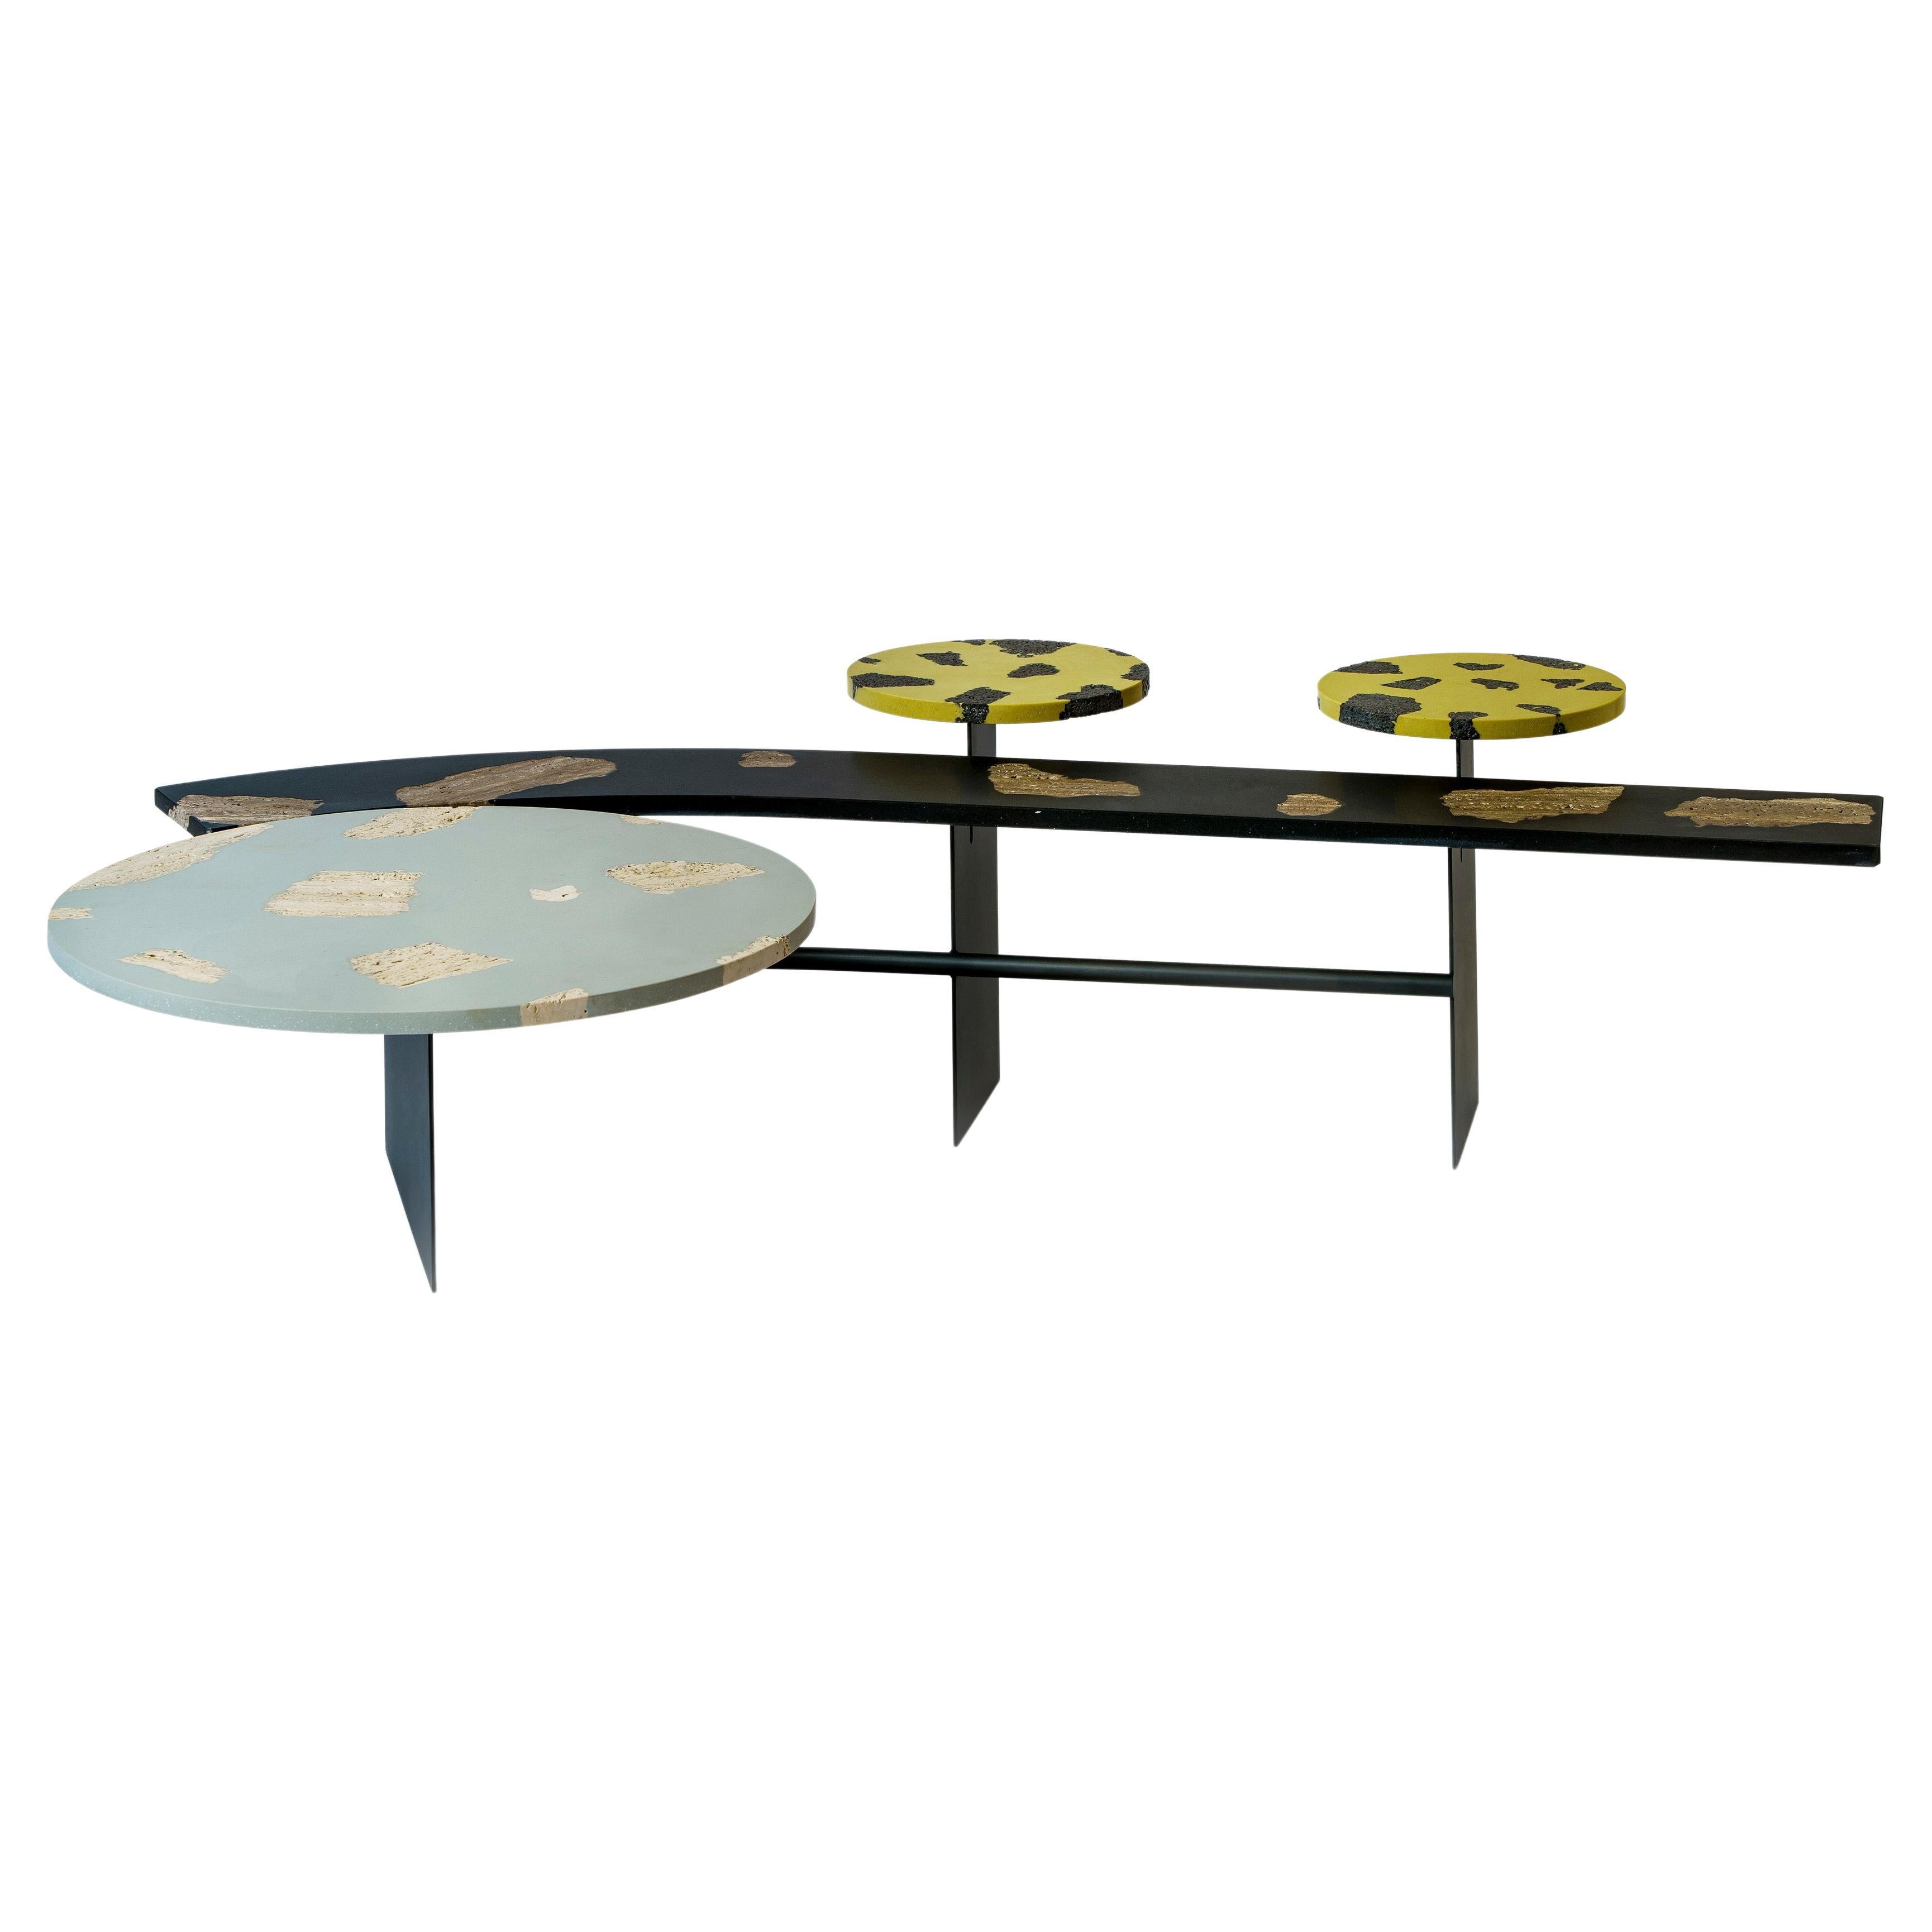 Yellow, Black, Gray Mimante Coffee Table 1 by Andrea Steidl for Delvis Unlimited For Sale